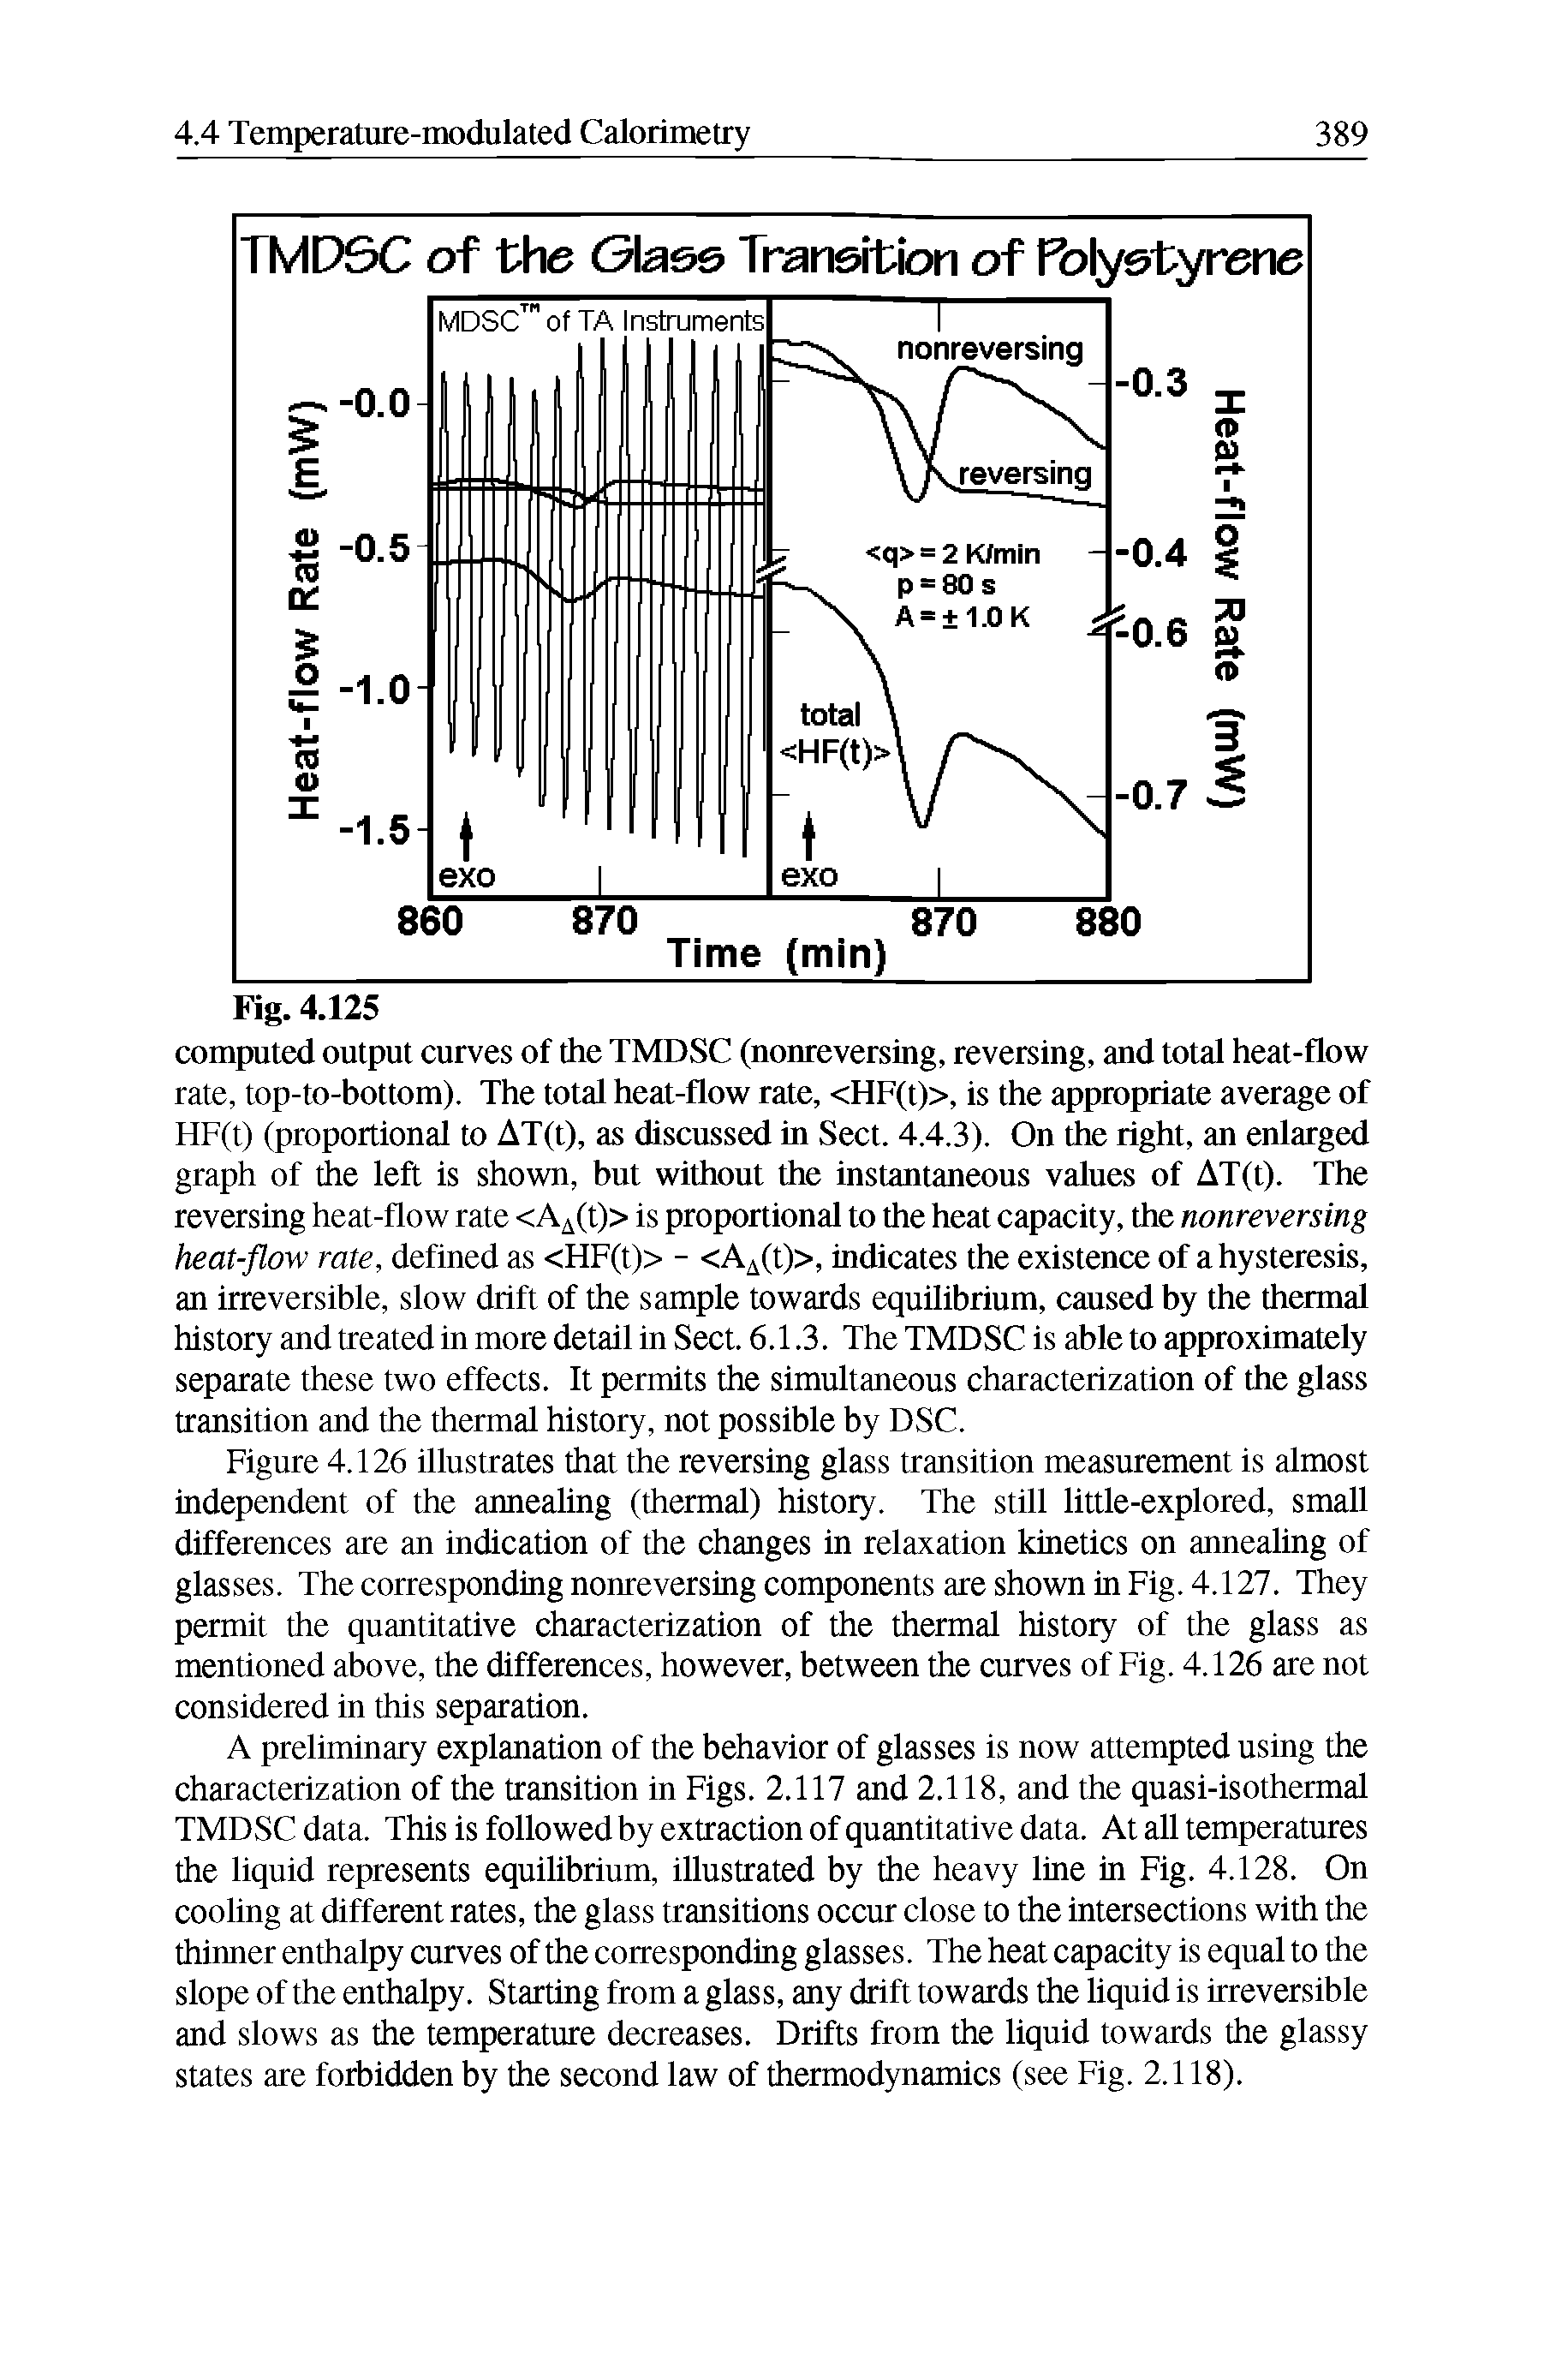 Figure 4.126 illustrates that the reversing glass transition measurement is almost independent of the annealing (thermal) history. The still little-explored, small differences are an indication of the changes in relaxation kinetics on annealing of glasses. The corresponding nonreversing components are shown in Fig. 4.127. They permit the quantitative characterization of the thermal history of the glass as mentioned above, the differences, however, between the curves of Fig. 4.126 are not considered in this separation.